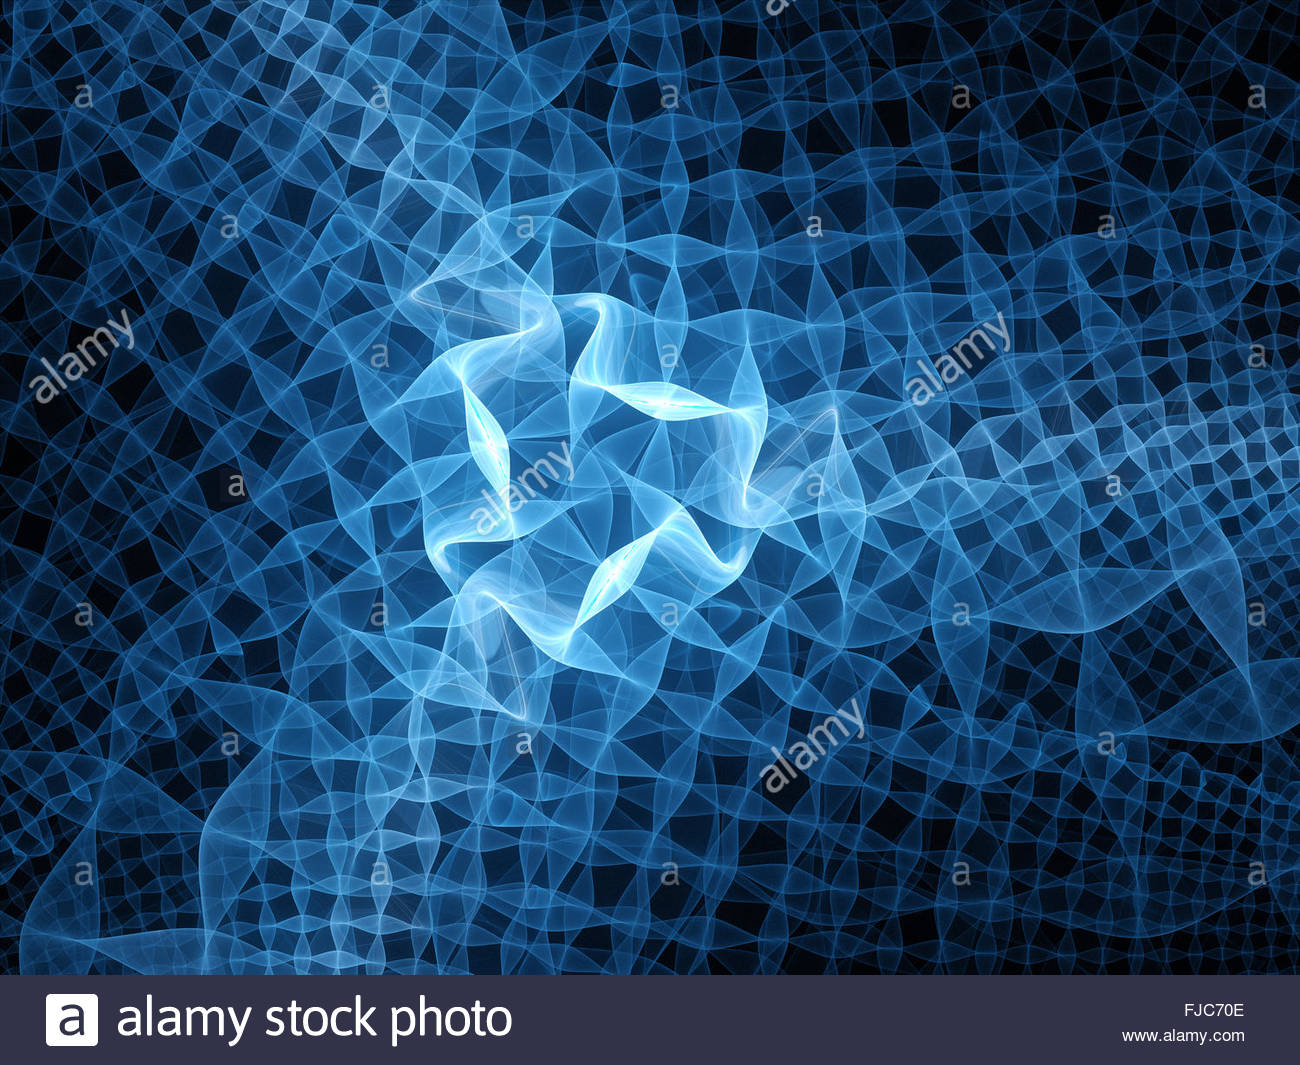 Blue Glowing Mesh Interference Puter Generated Abstract Stock